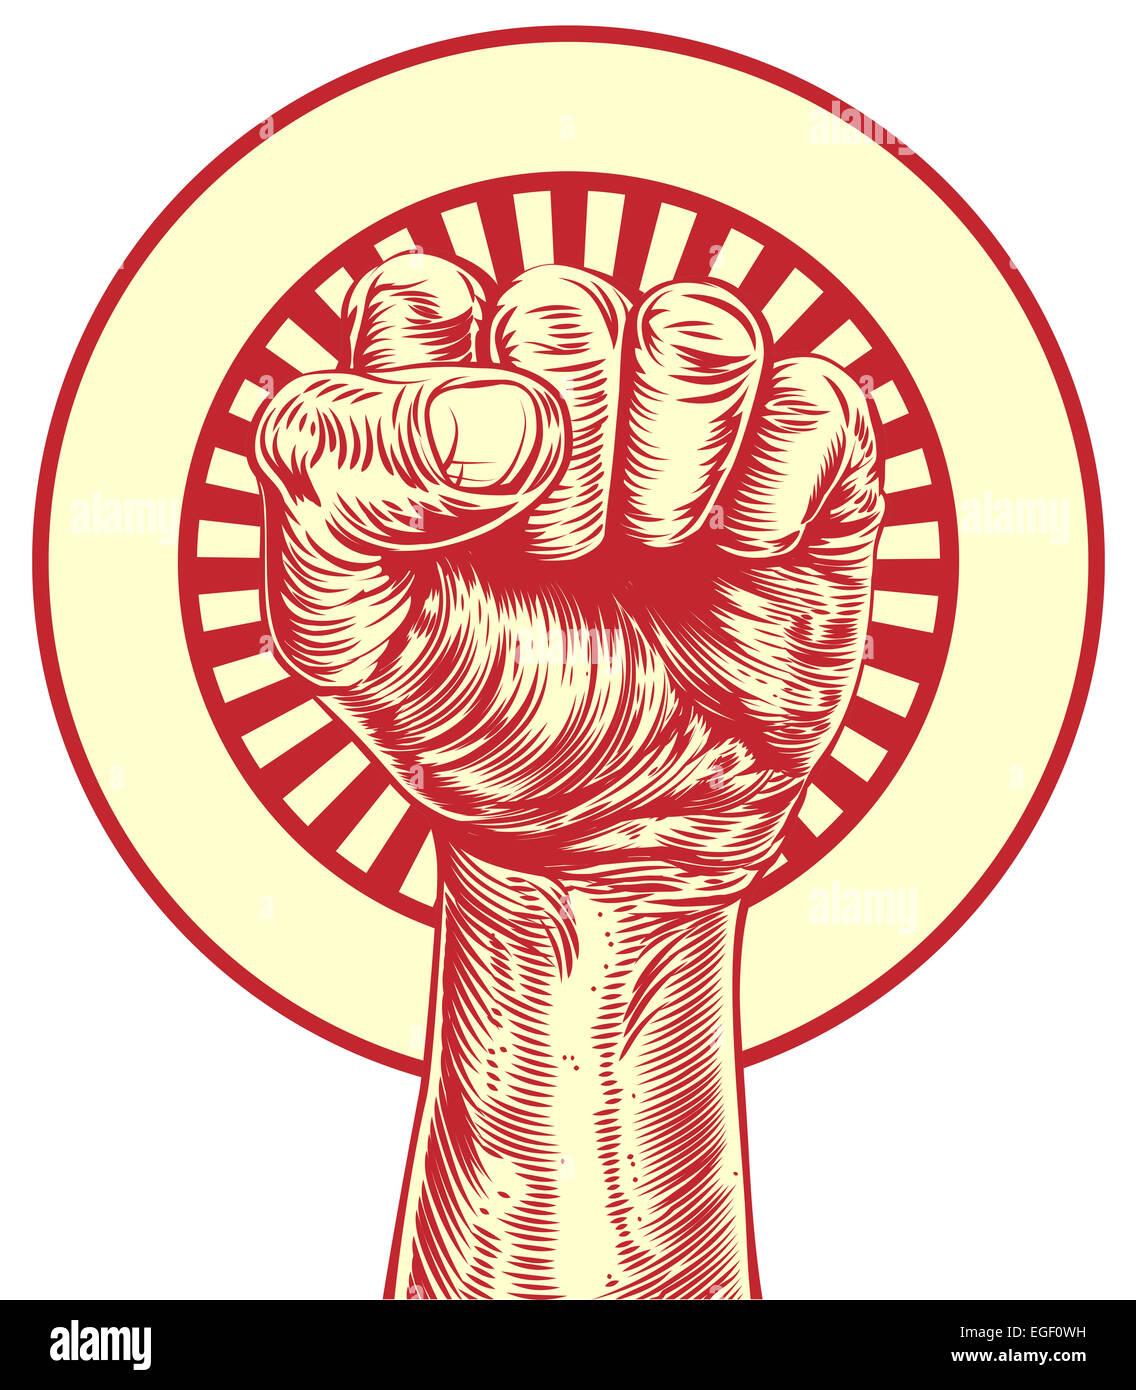 An original illustration of a fist held in the air in a vintage wood cut propaganda style Stock Photo